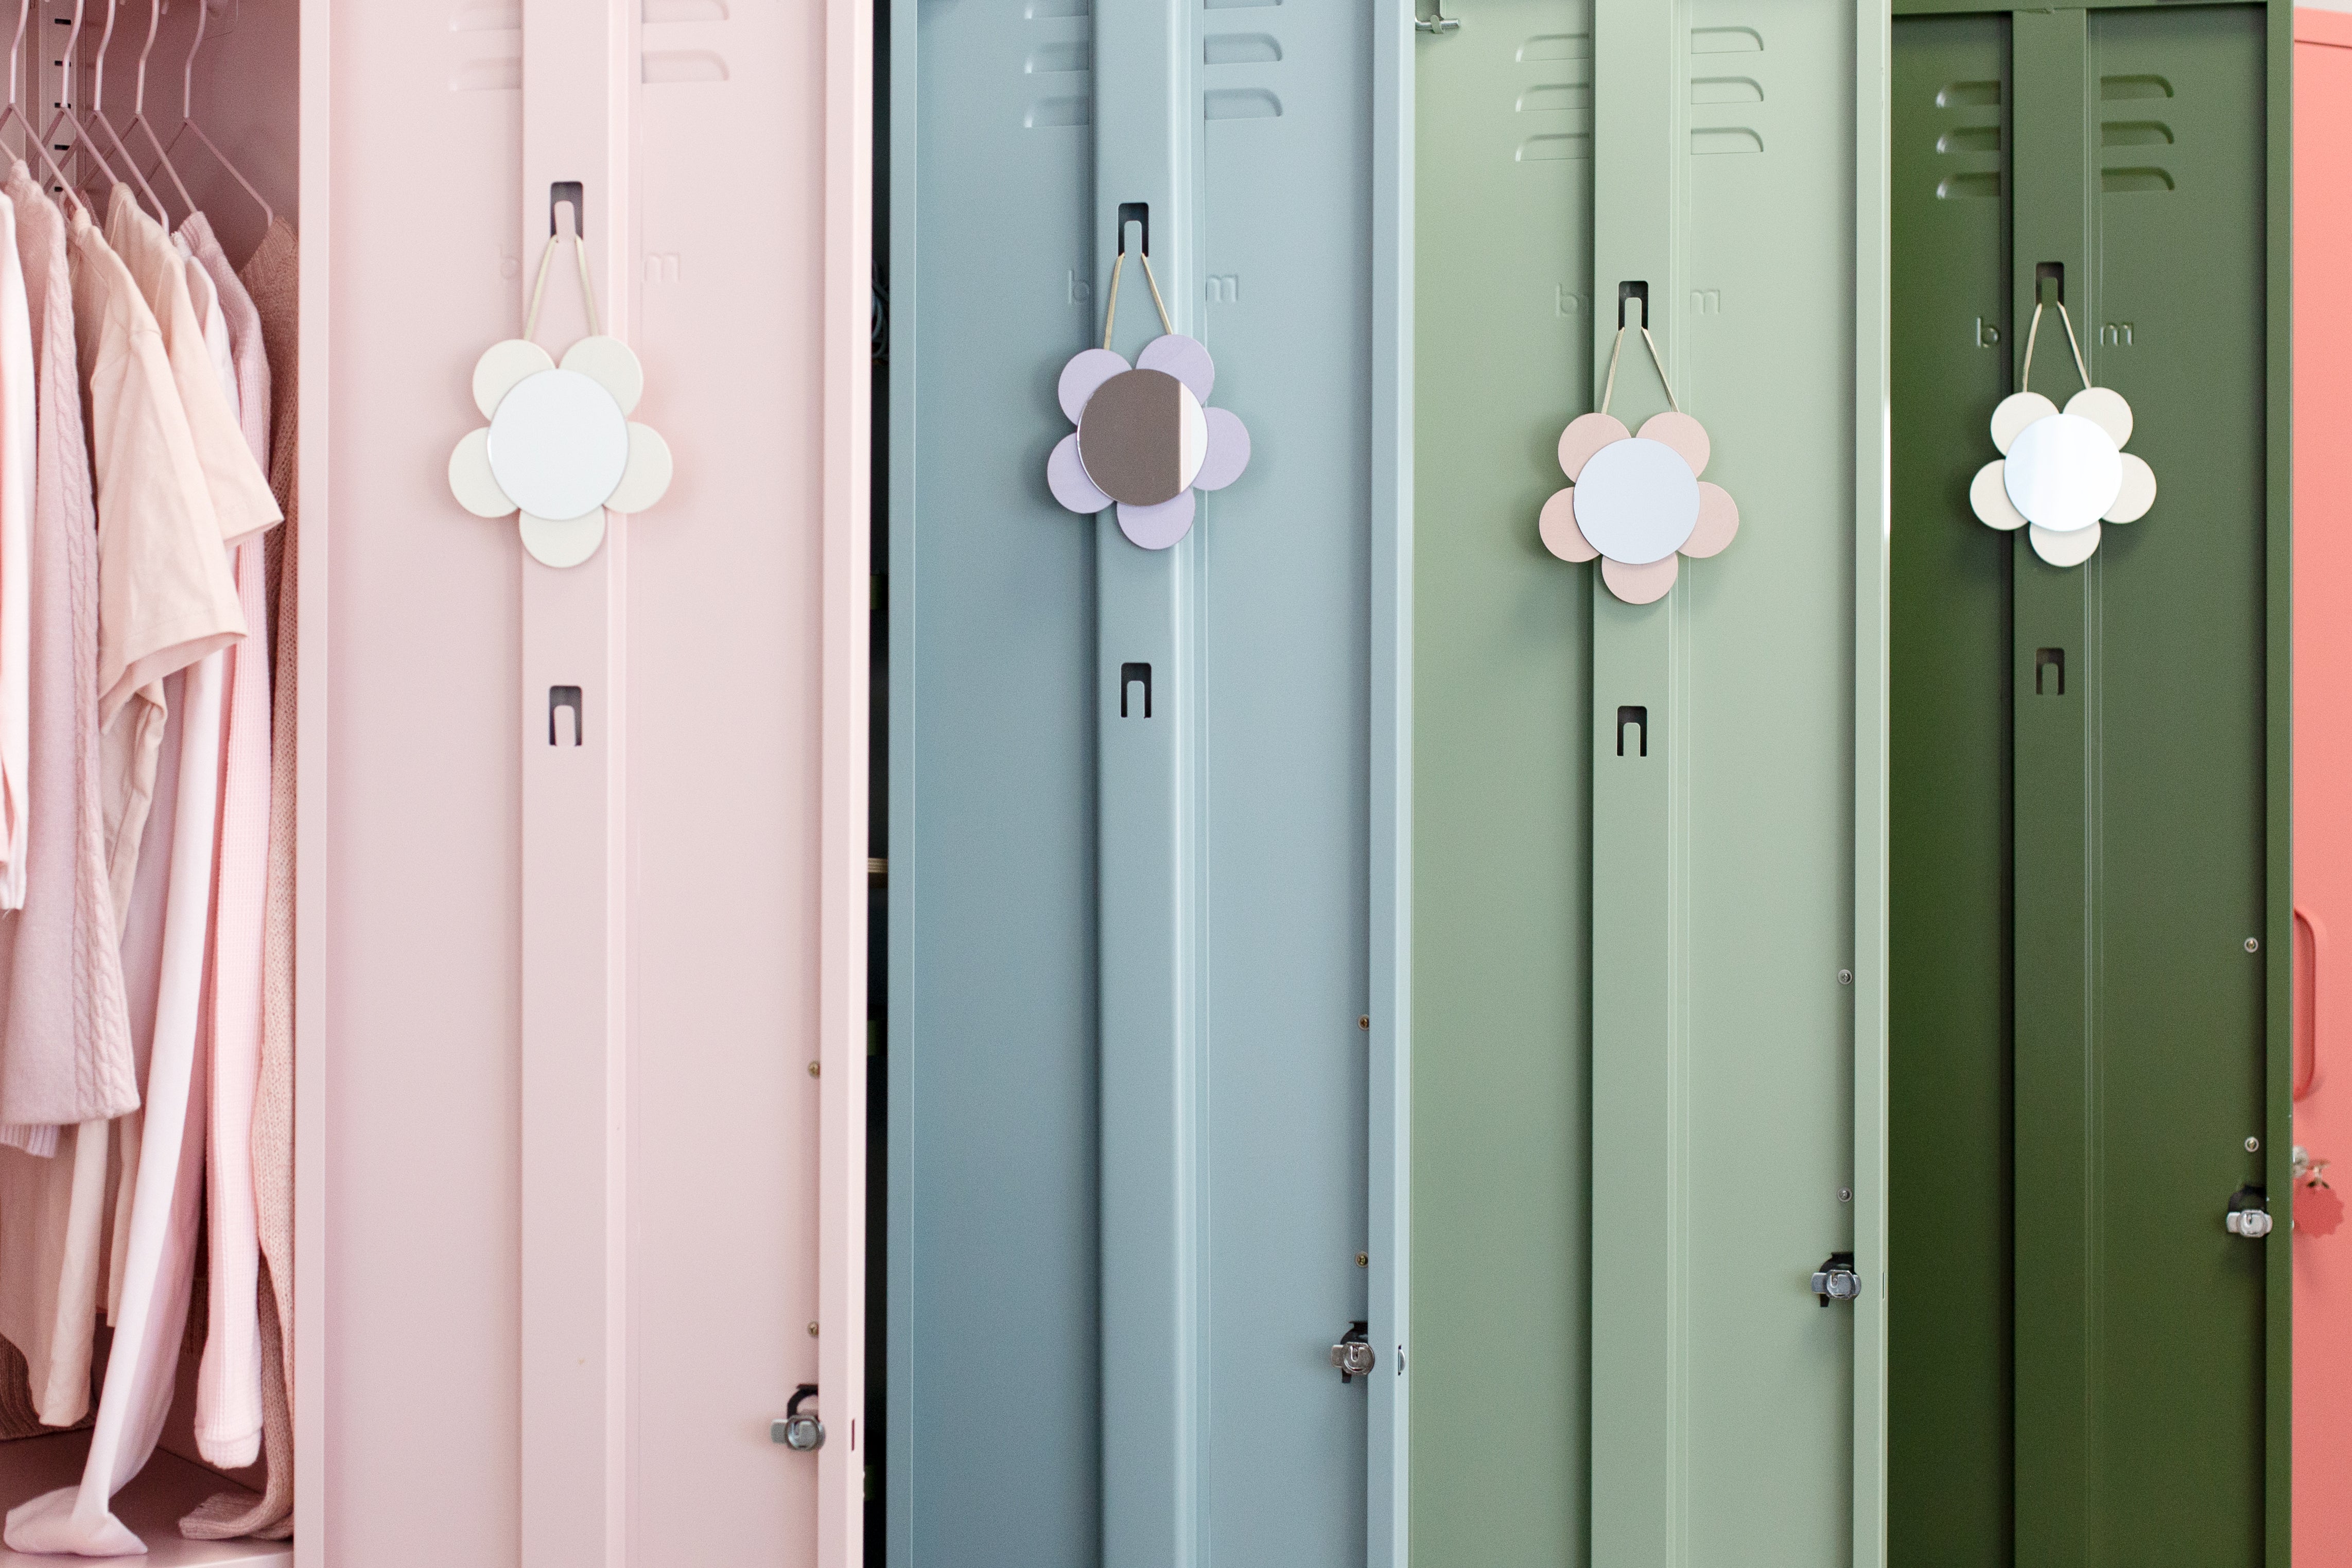 A line of four lockers, all with their doors open. A pale blush pink locker, a darker pink Berry locker, a pale Sage green locker and a darker Olive green locker. They all have flower mirrors hanging on the inside of their doors. 